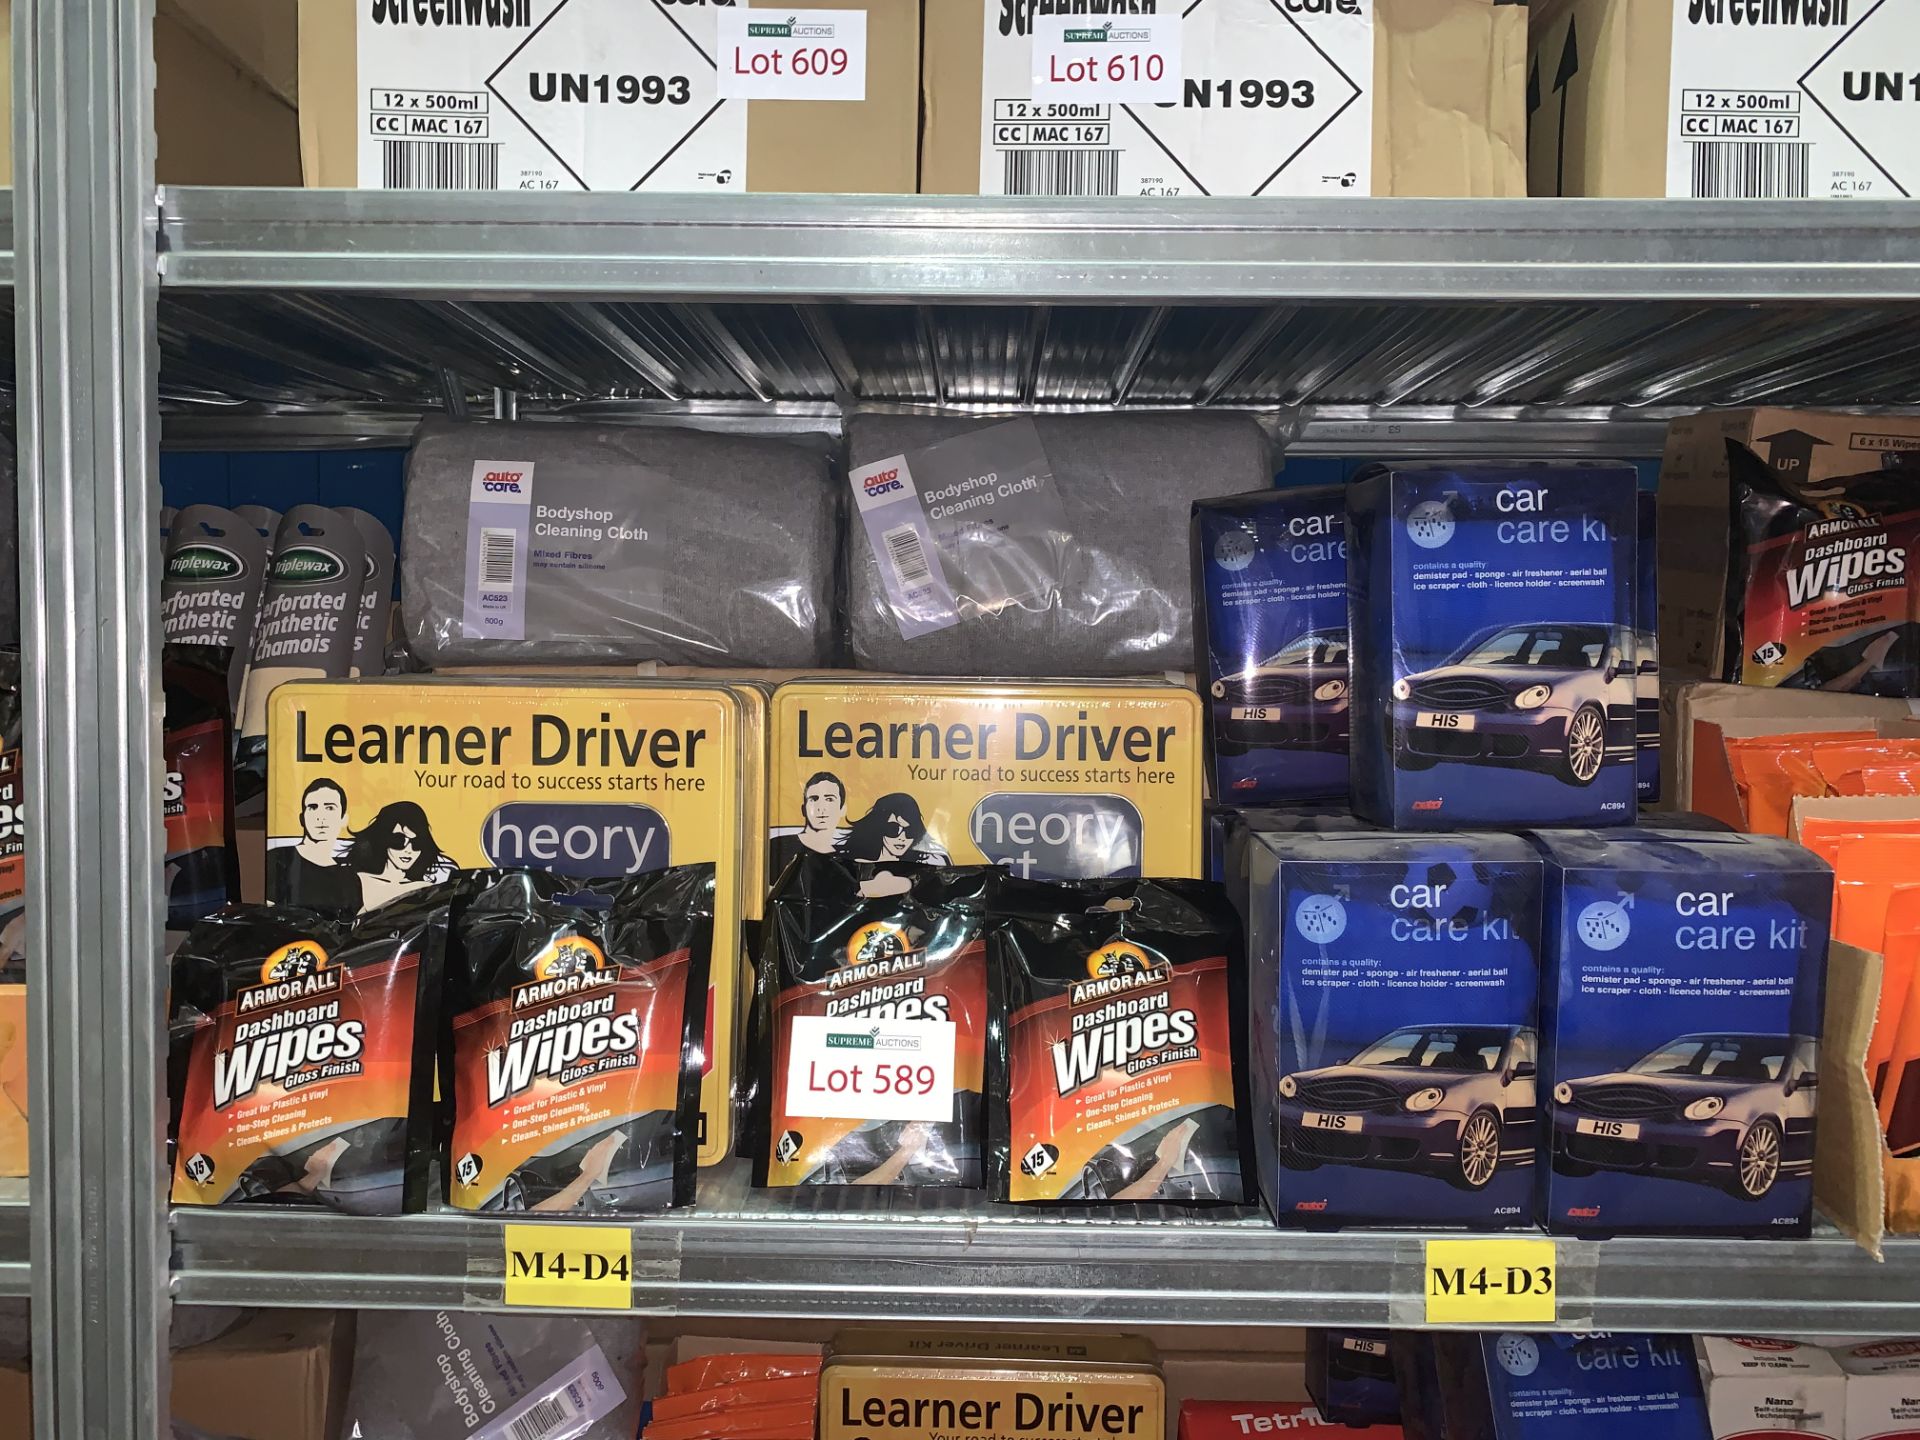 CAR LOT CONTAINING DASHBOARD WIPES, BODYSHOP CLEANING CLOTH, AA LEARNER DRIVER KITS, CAR CARE